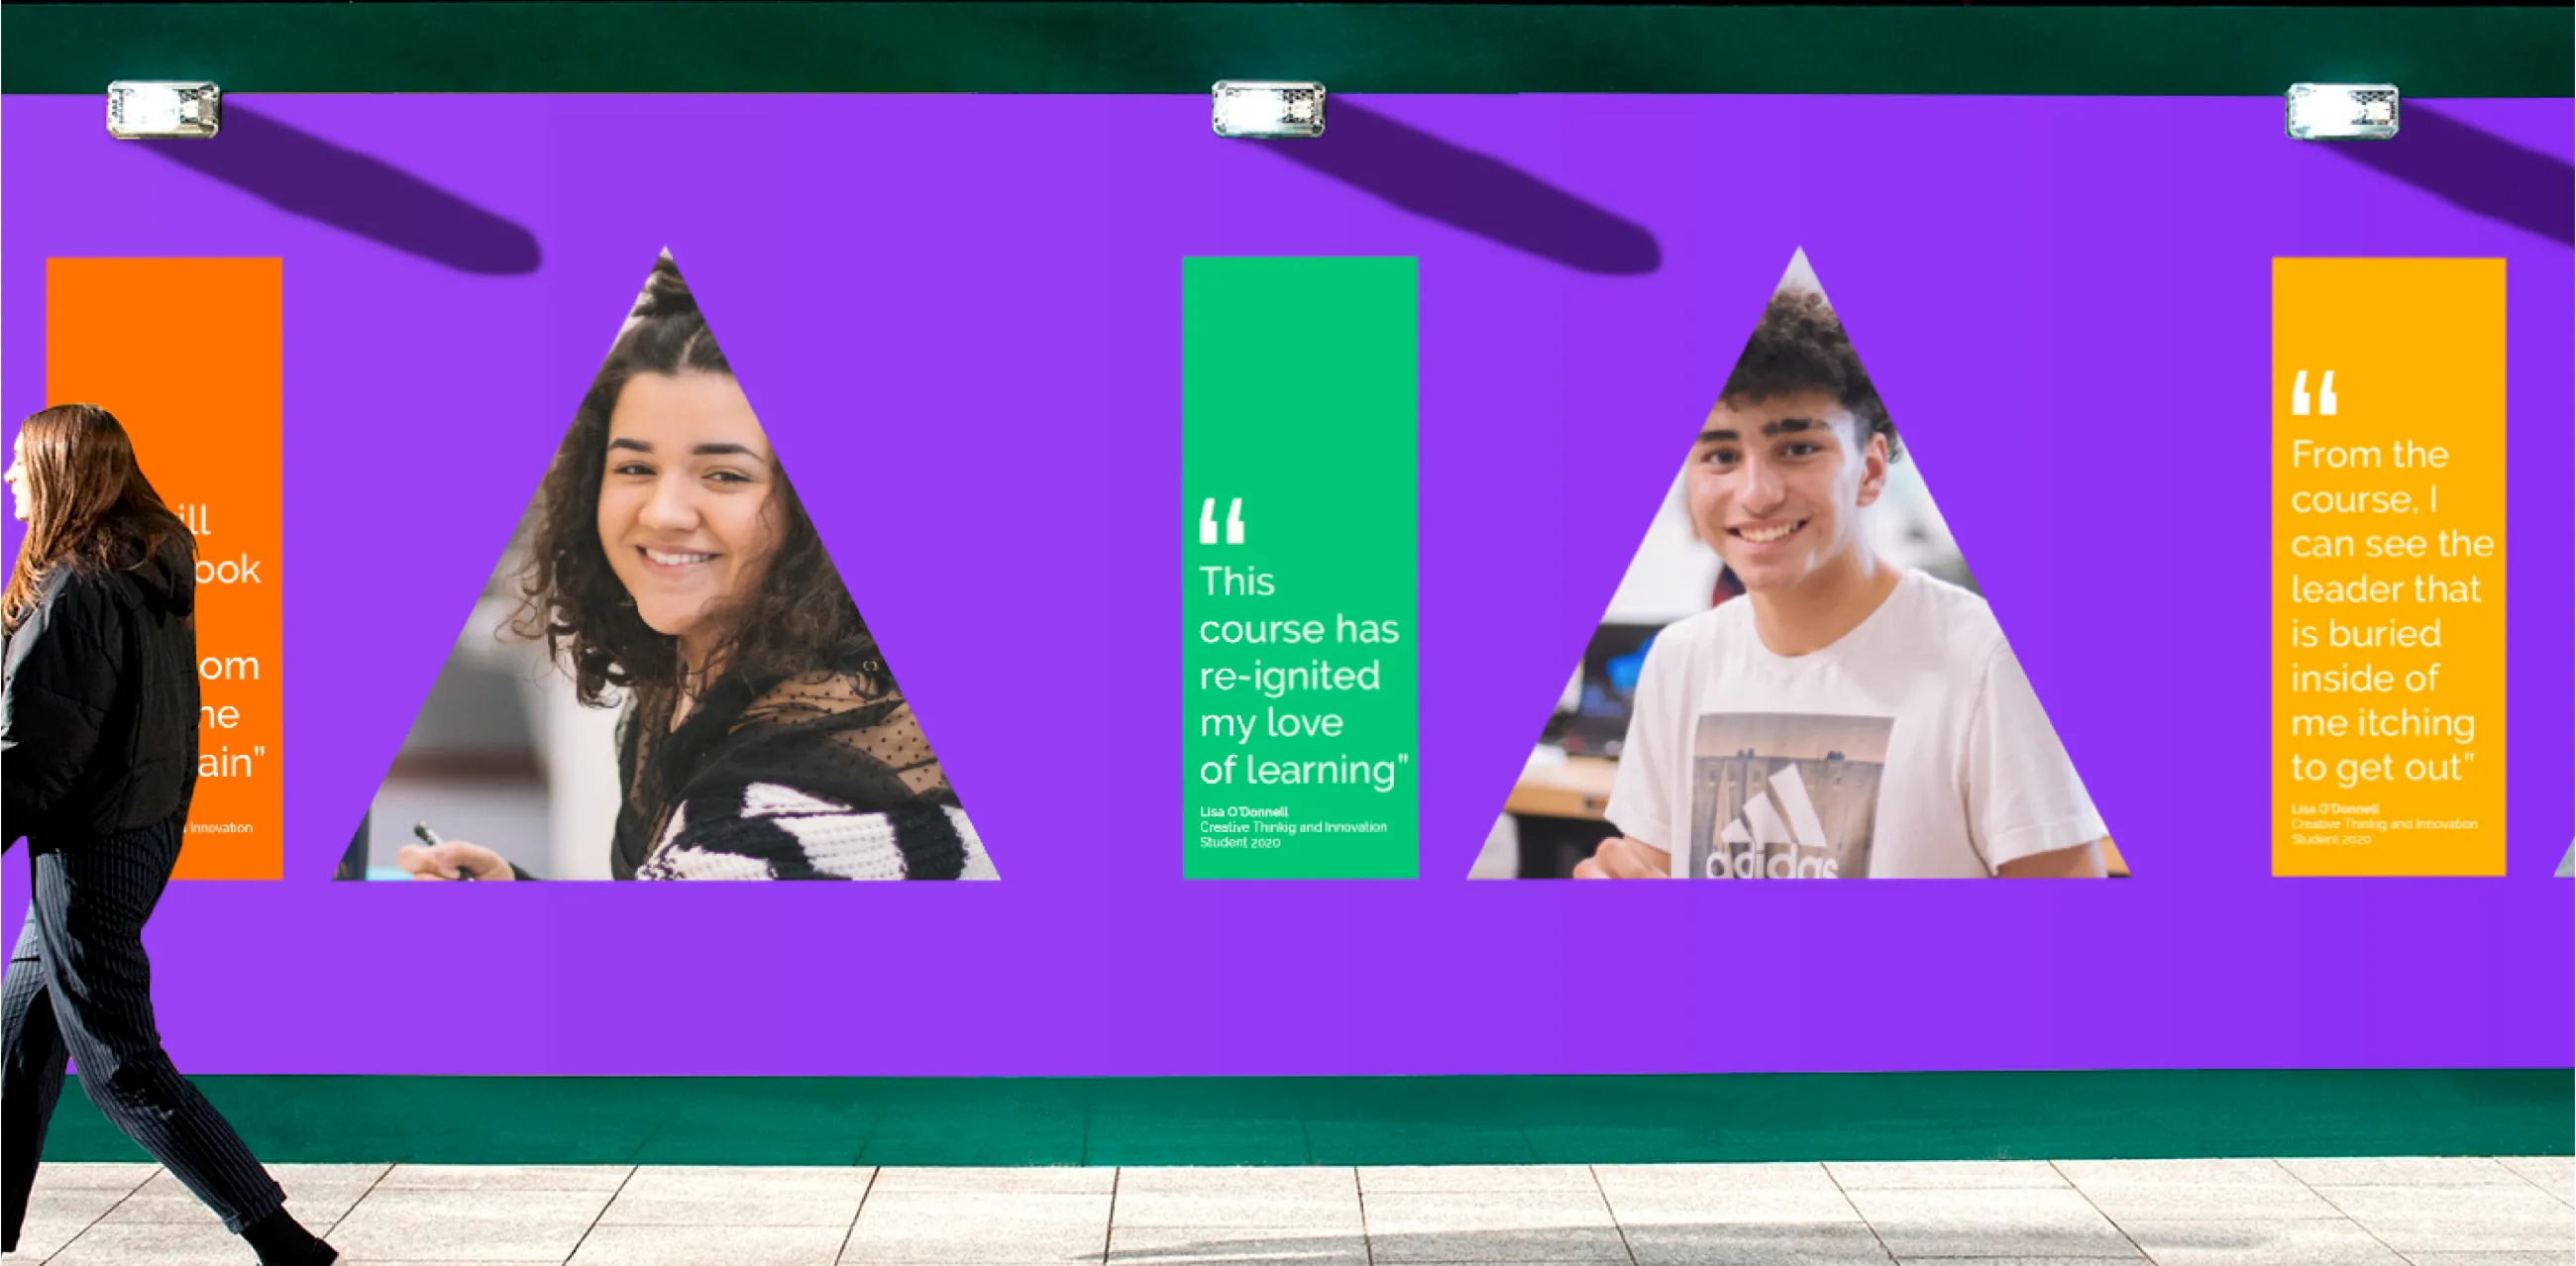 A billboard showing the IA branding and testimonials from past students and alumni  